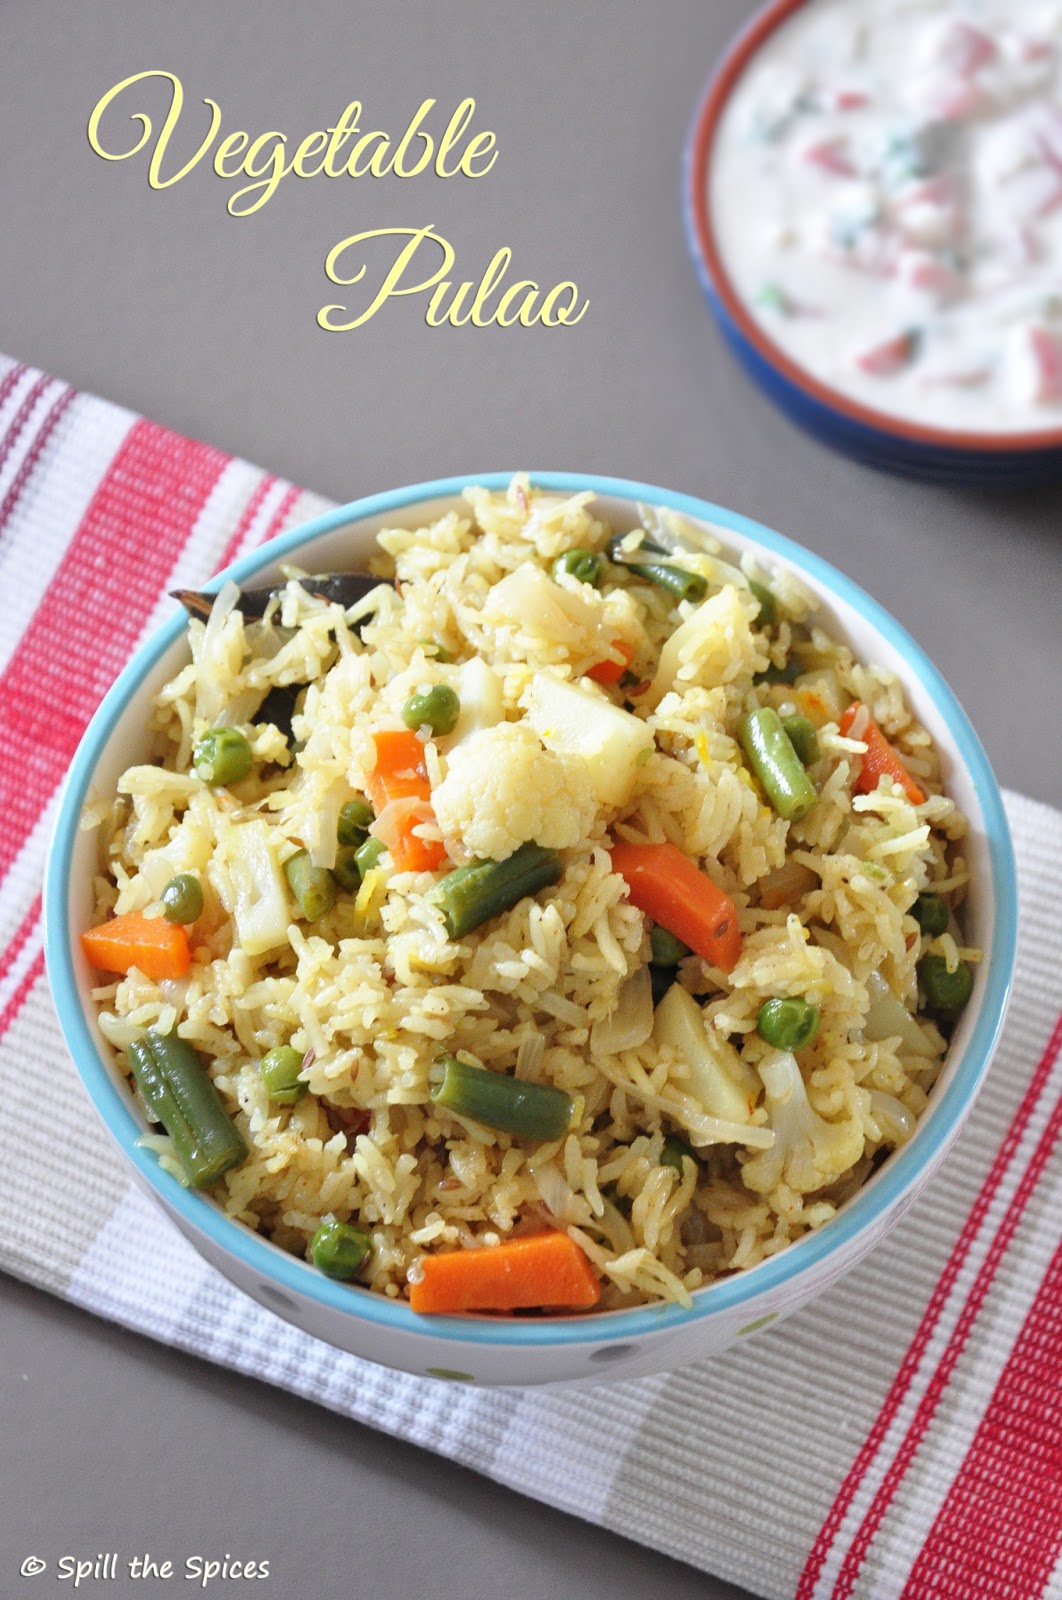 Vegetable Pulao | Spill the Spices